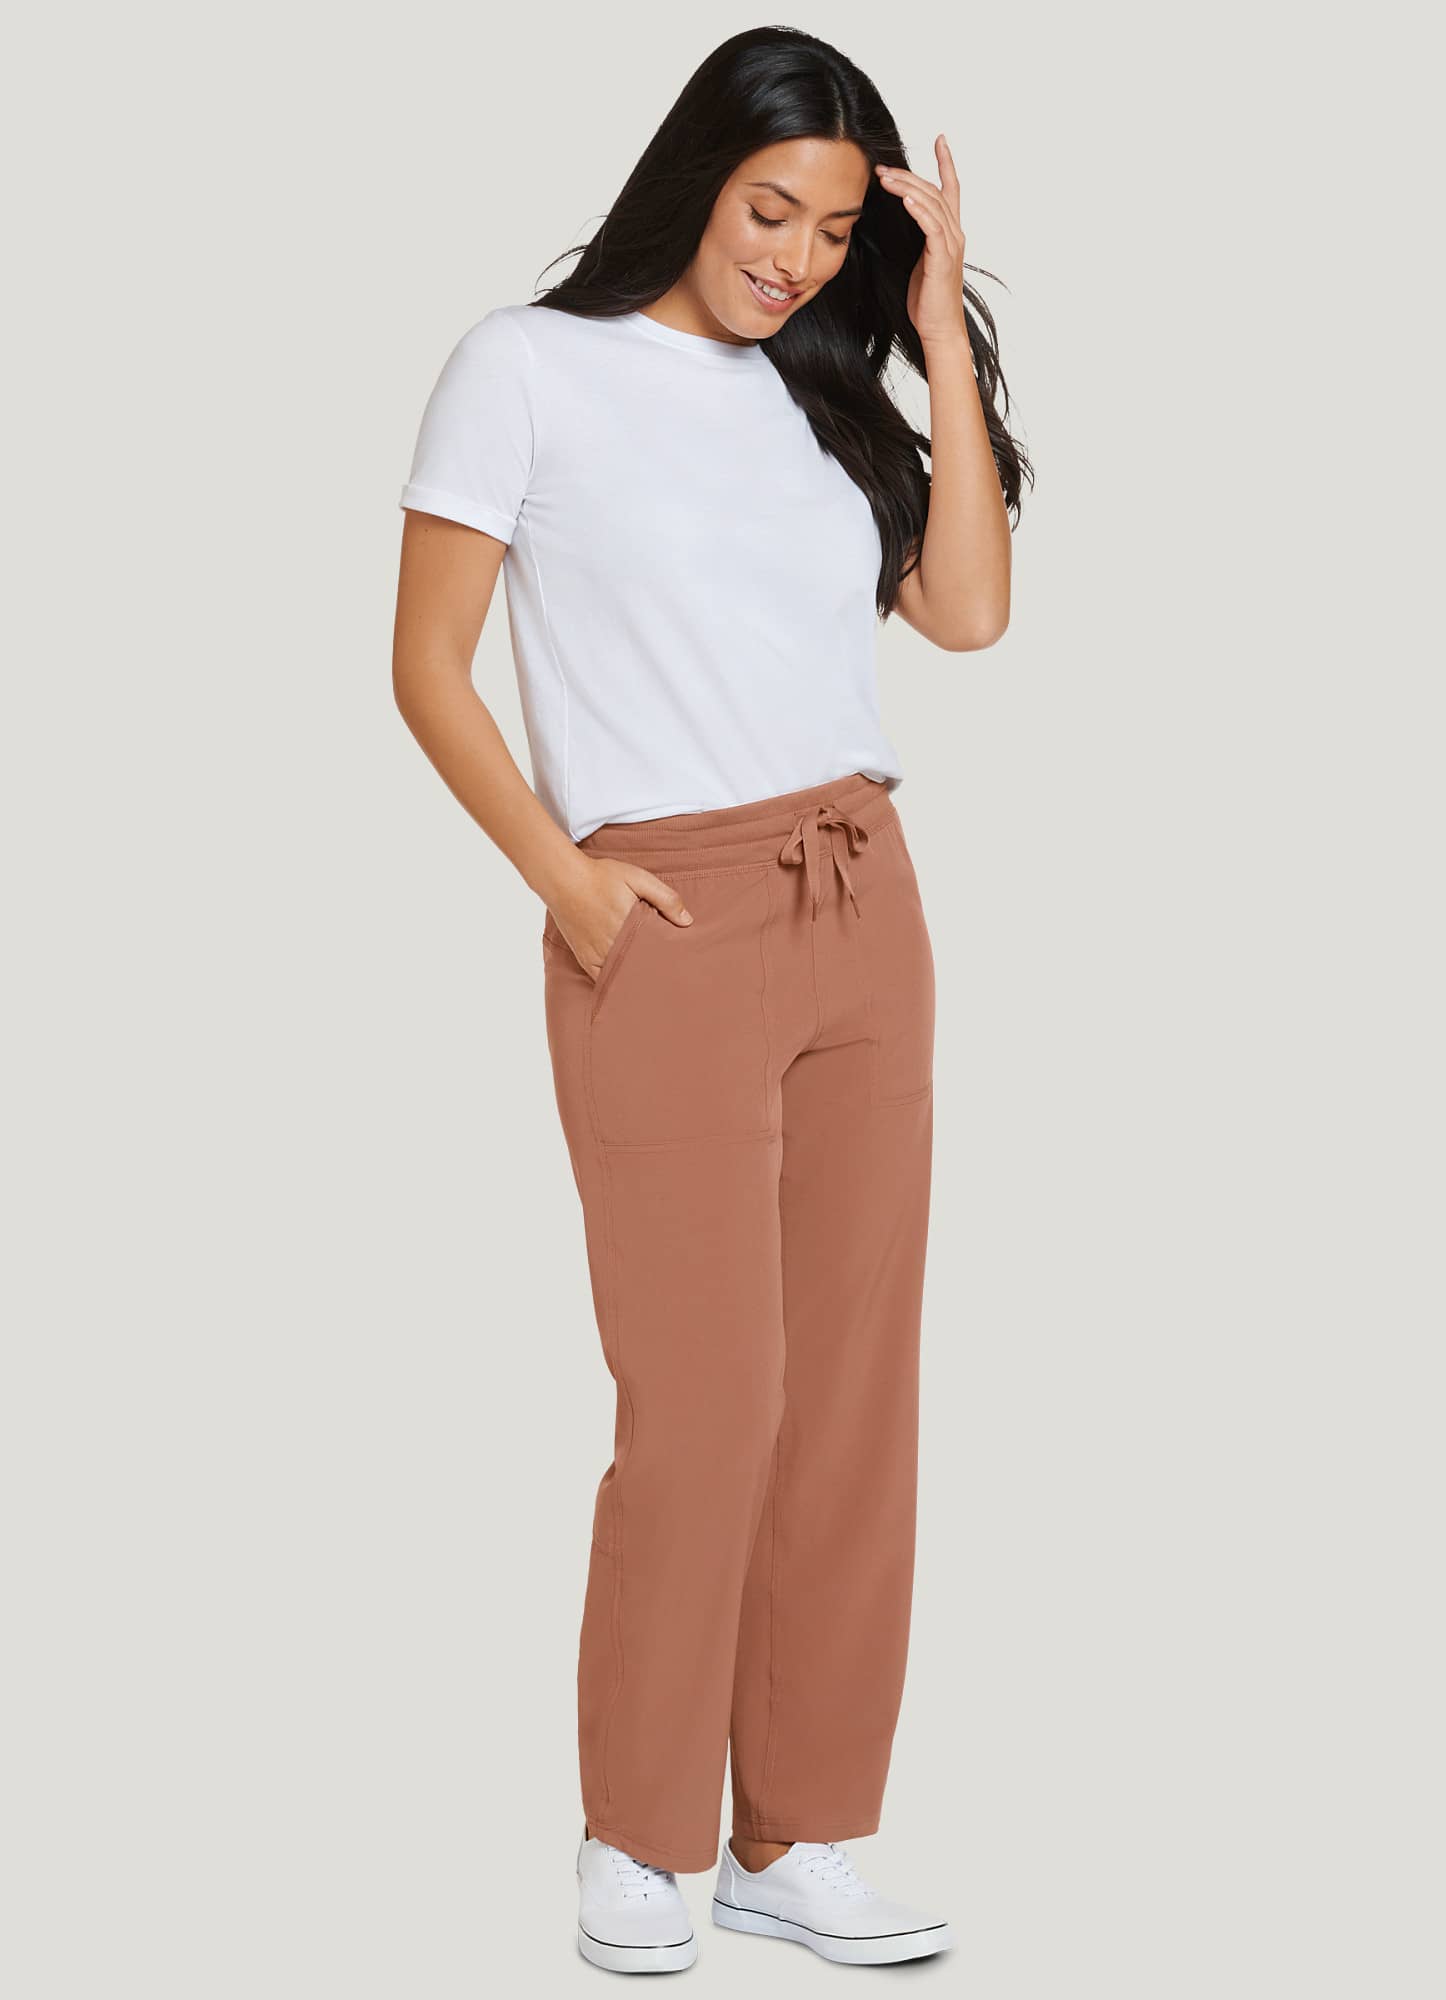 New Jockey Track Pant for Woman 90 cm size M  Pants for women, Leisure  wear, Clothes design